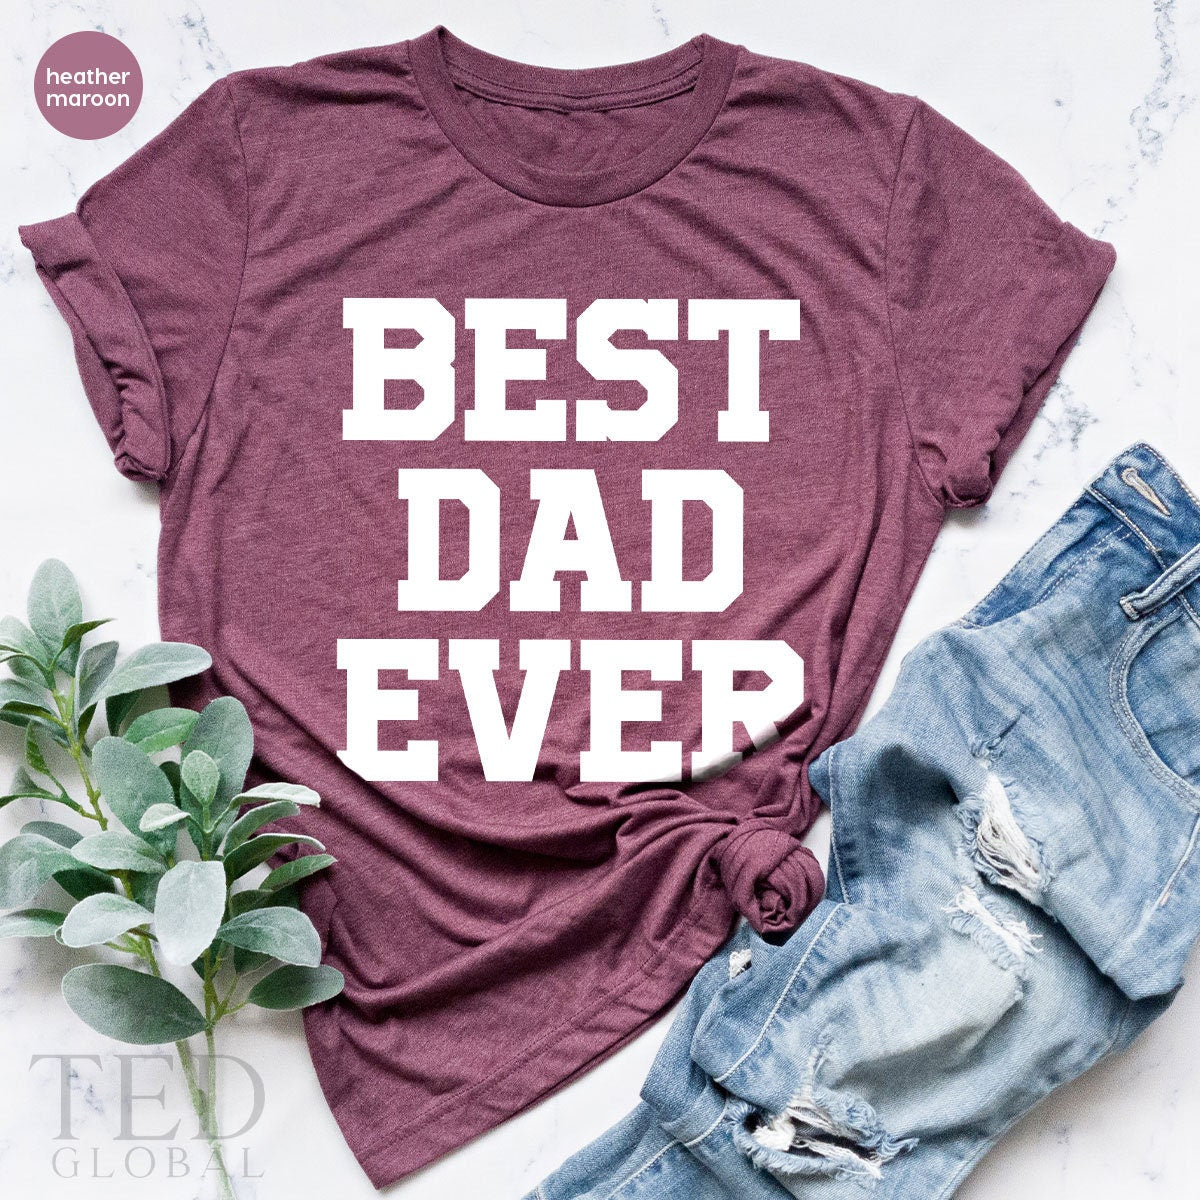 Amazon.com: Hocgiwd Gifts for Dad, Dad Gifts, Dad Birthday Gift, Funny Dad  Gifts for Birthday, Birthday Gifts for Dad, New Dad Gifts, Gifts for Dad  from Daughter, Best Dad Ever Gift Ideas